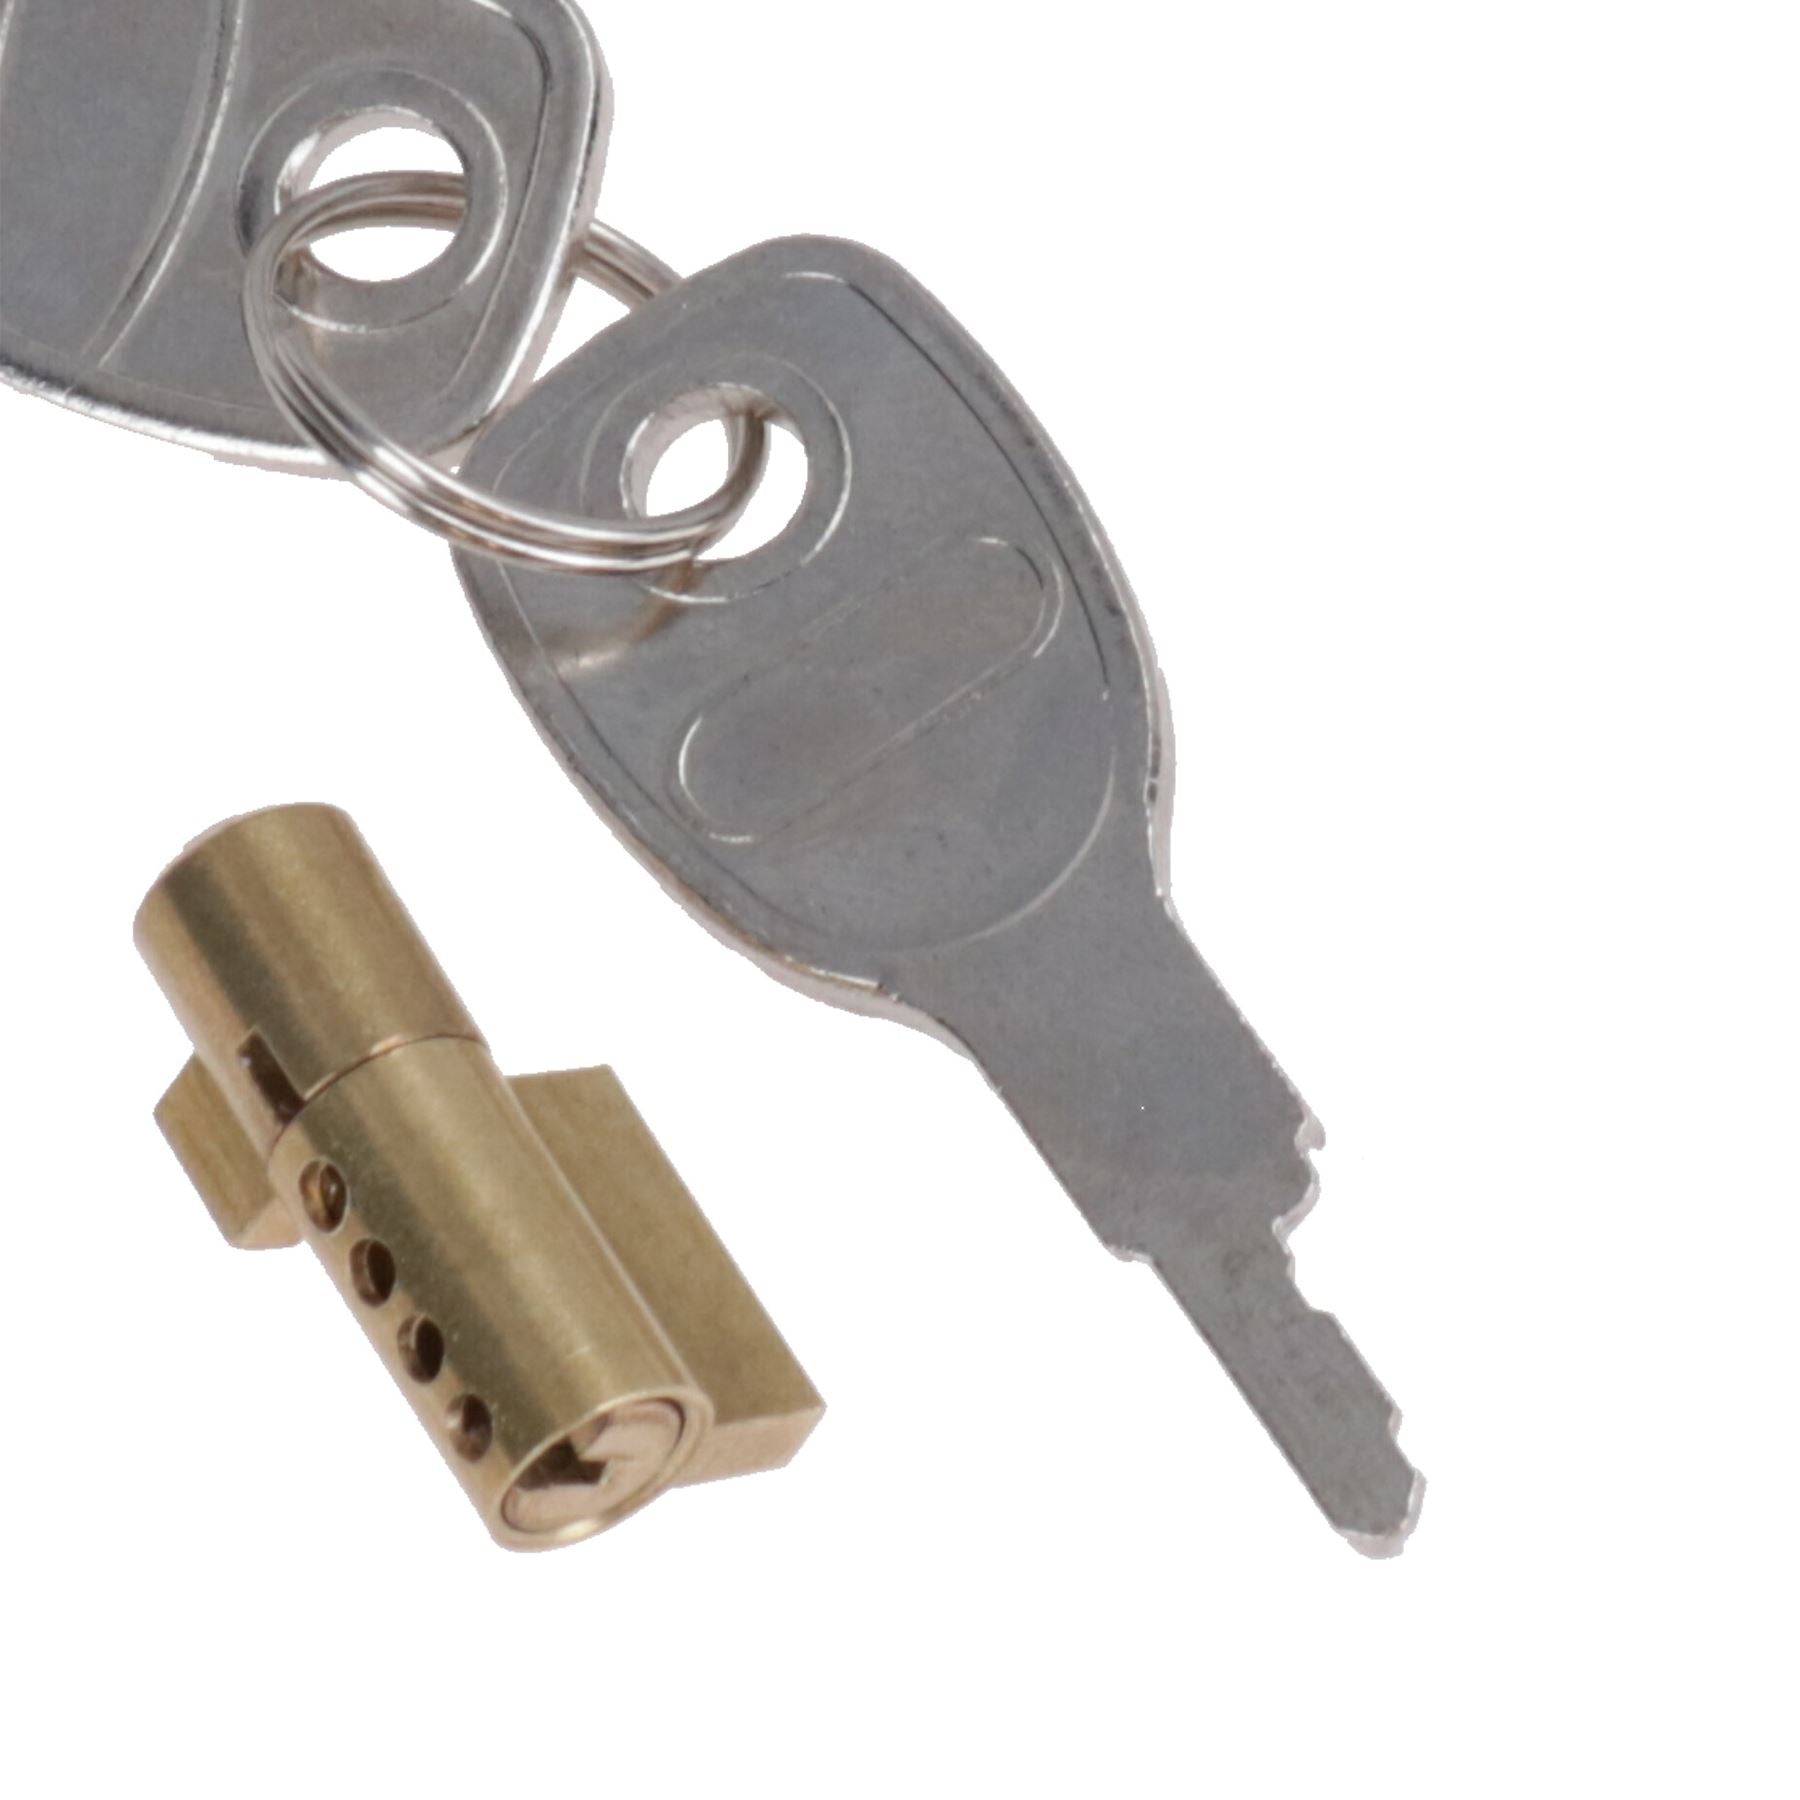 Trailer Lock for Pressed Steel Hitches / Coupling